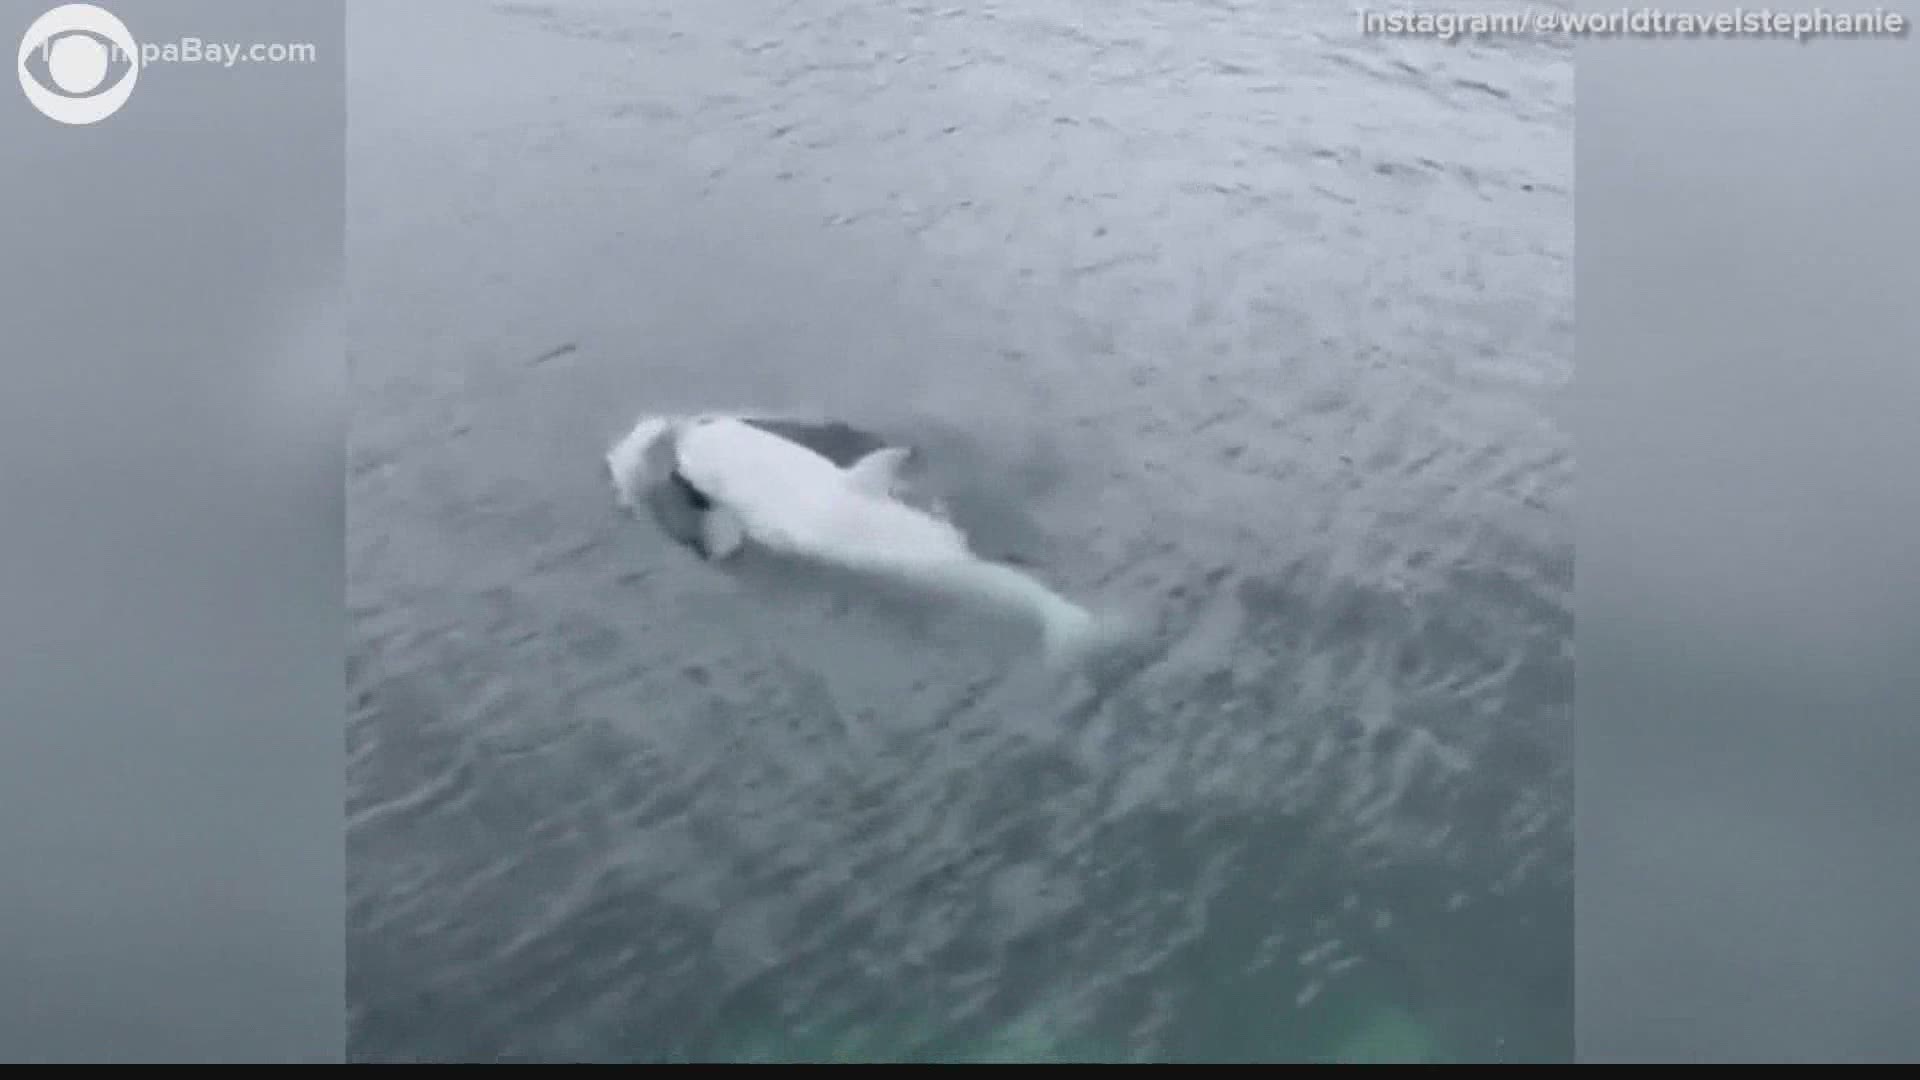 There have only been 8 white orcas recorded in the wild, which makes this sighting quite rare.